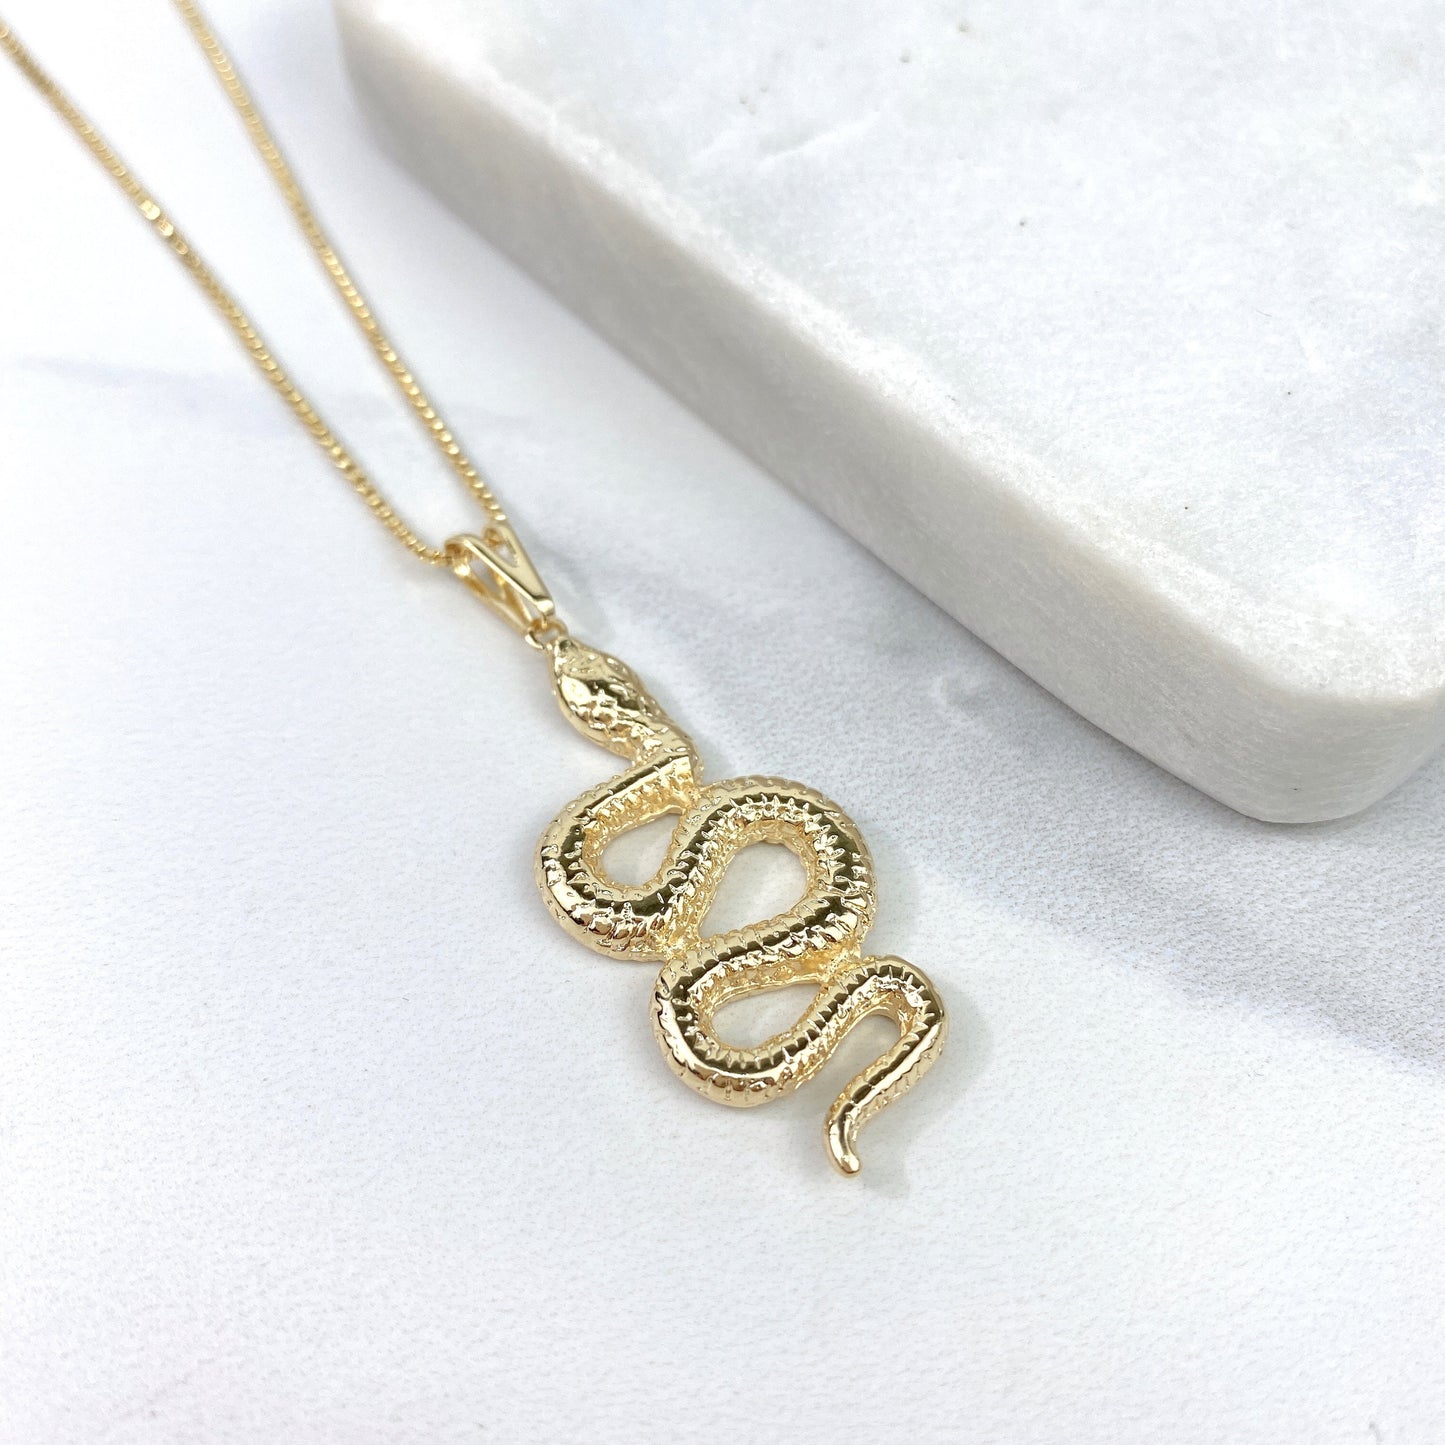 18k Gold Filled Textured Snake Pendant or Box Chain Necklace For Wholesale and Jewelry Supplies